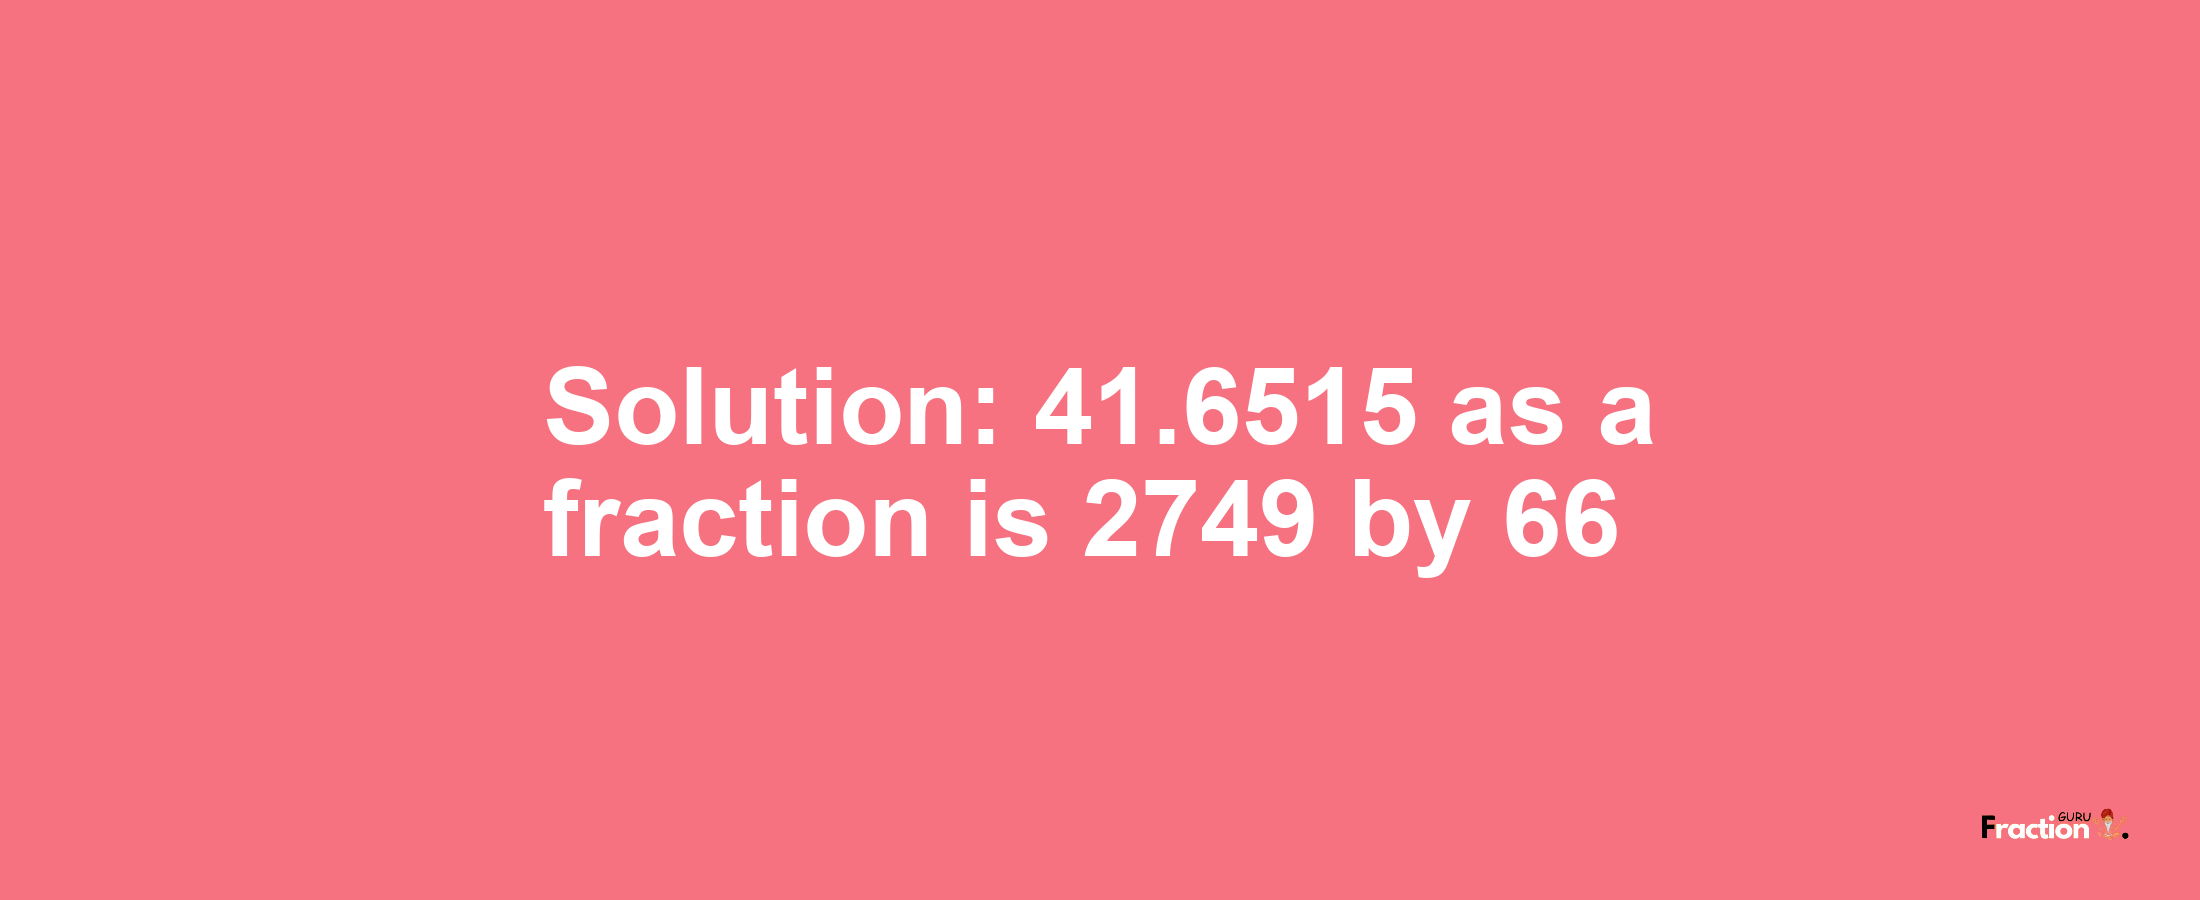 Solution:41.6515 as a fraction is 2749/66